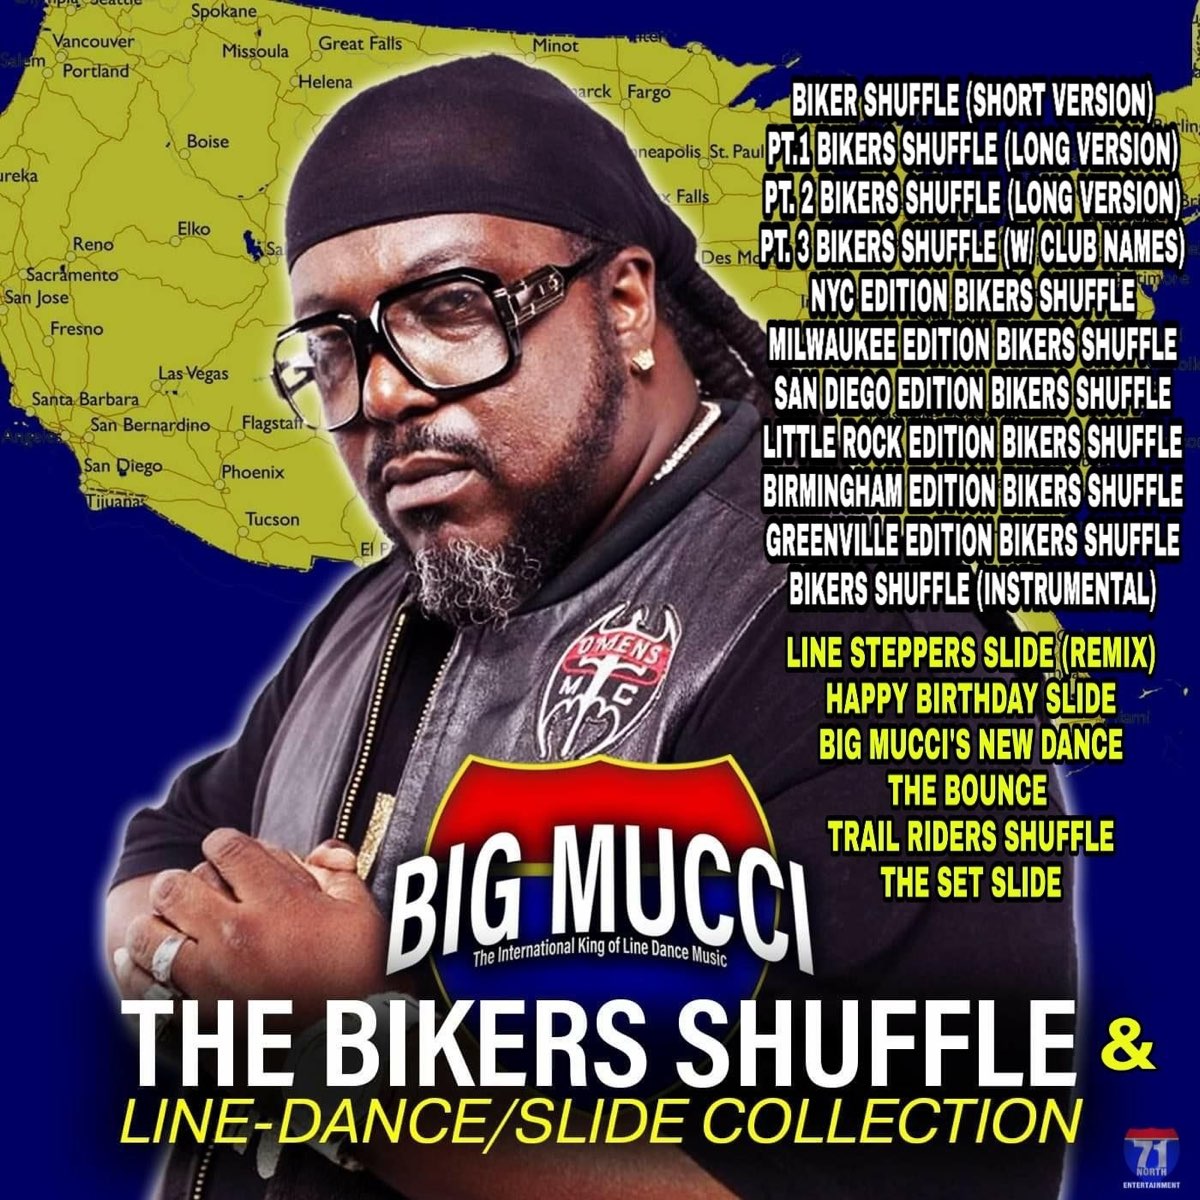 ‎Big Mucci the Bikers Shuffle & Line-Dance / Slide Collection by Big ...